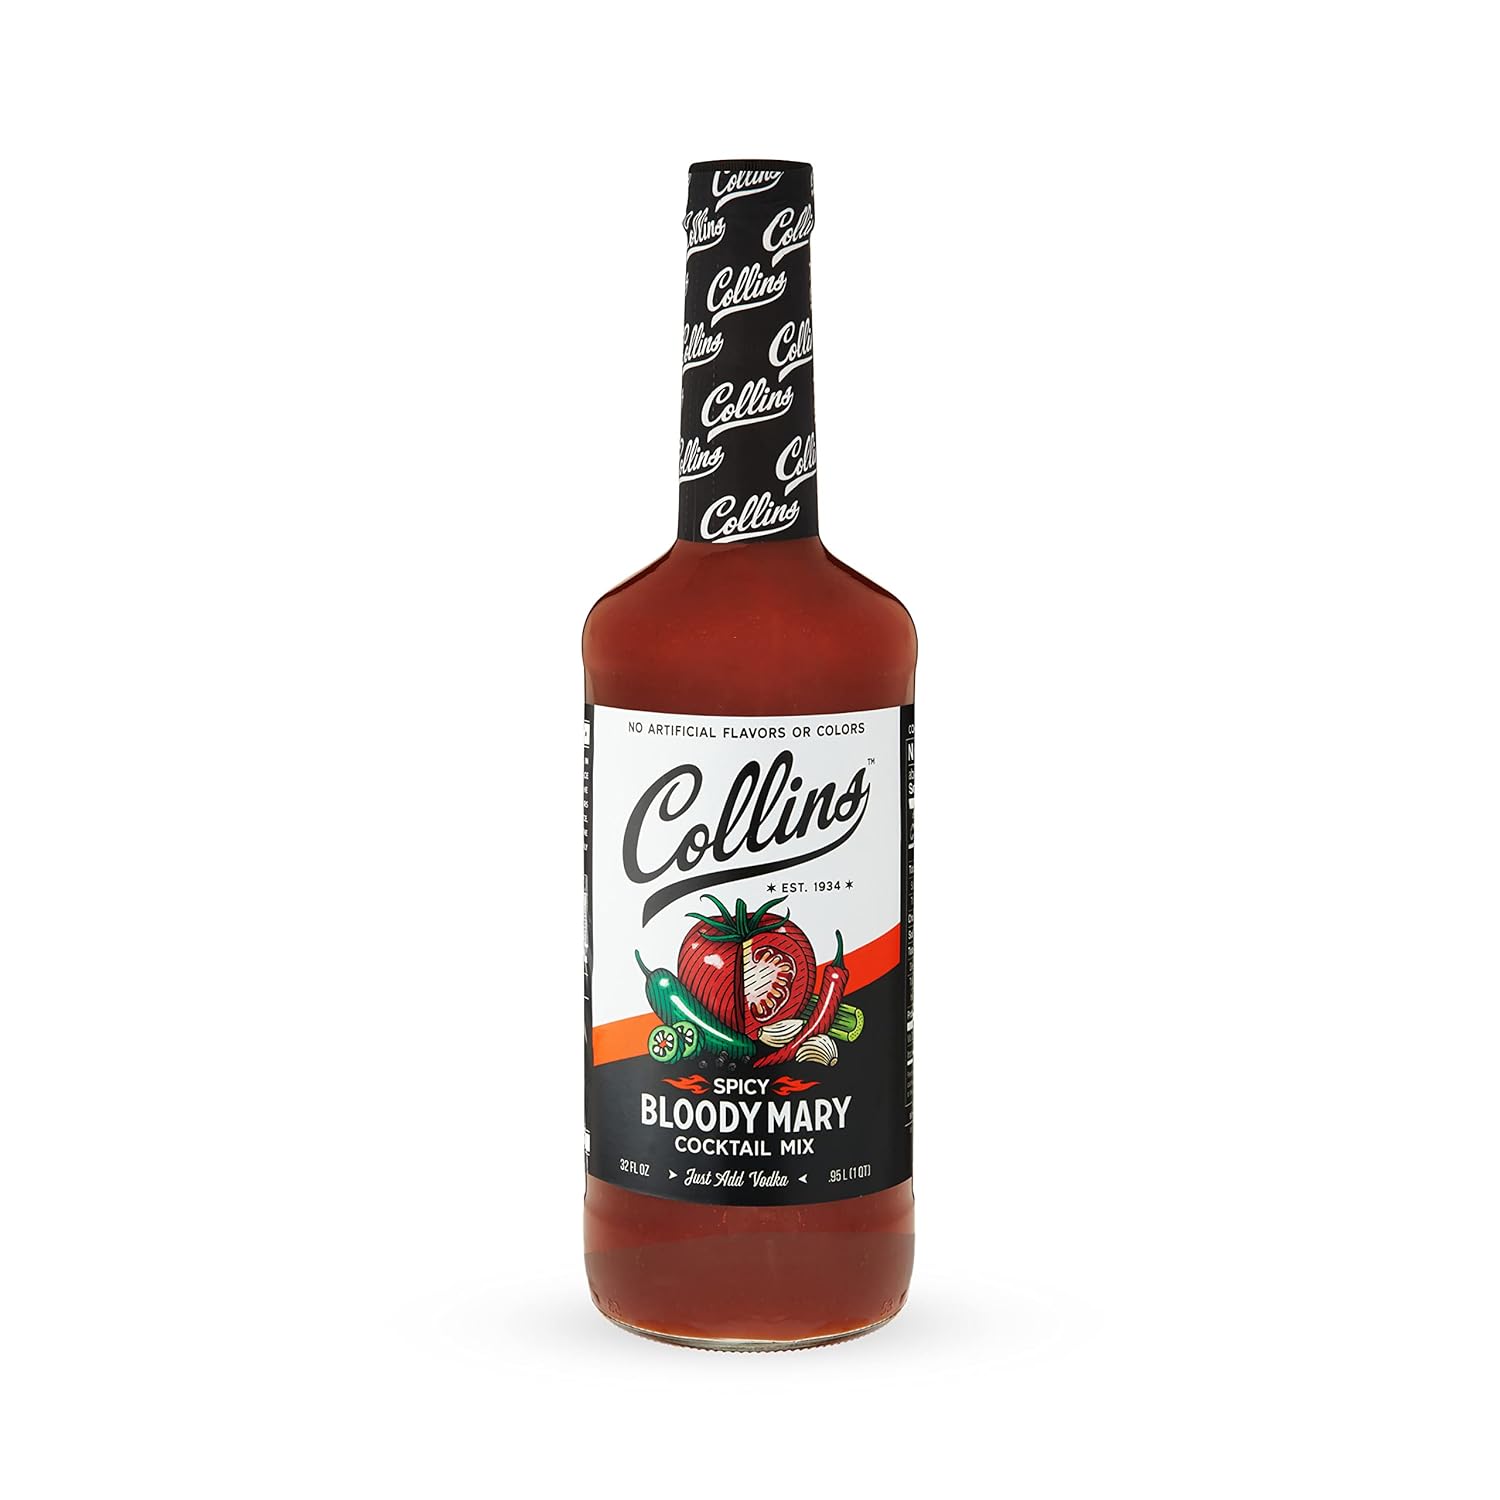 Collins Spicy Bloody Mary Mix, Made With Tomato, Garlic, Worcestershire, Horseradish, Cayenne and Other Spices, Brunch Cocktail Recipe, Bartender Mixer, Drinking Gifts, Home Cocktail bar, 32 fl oz